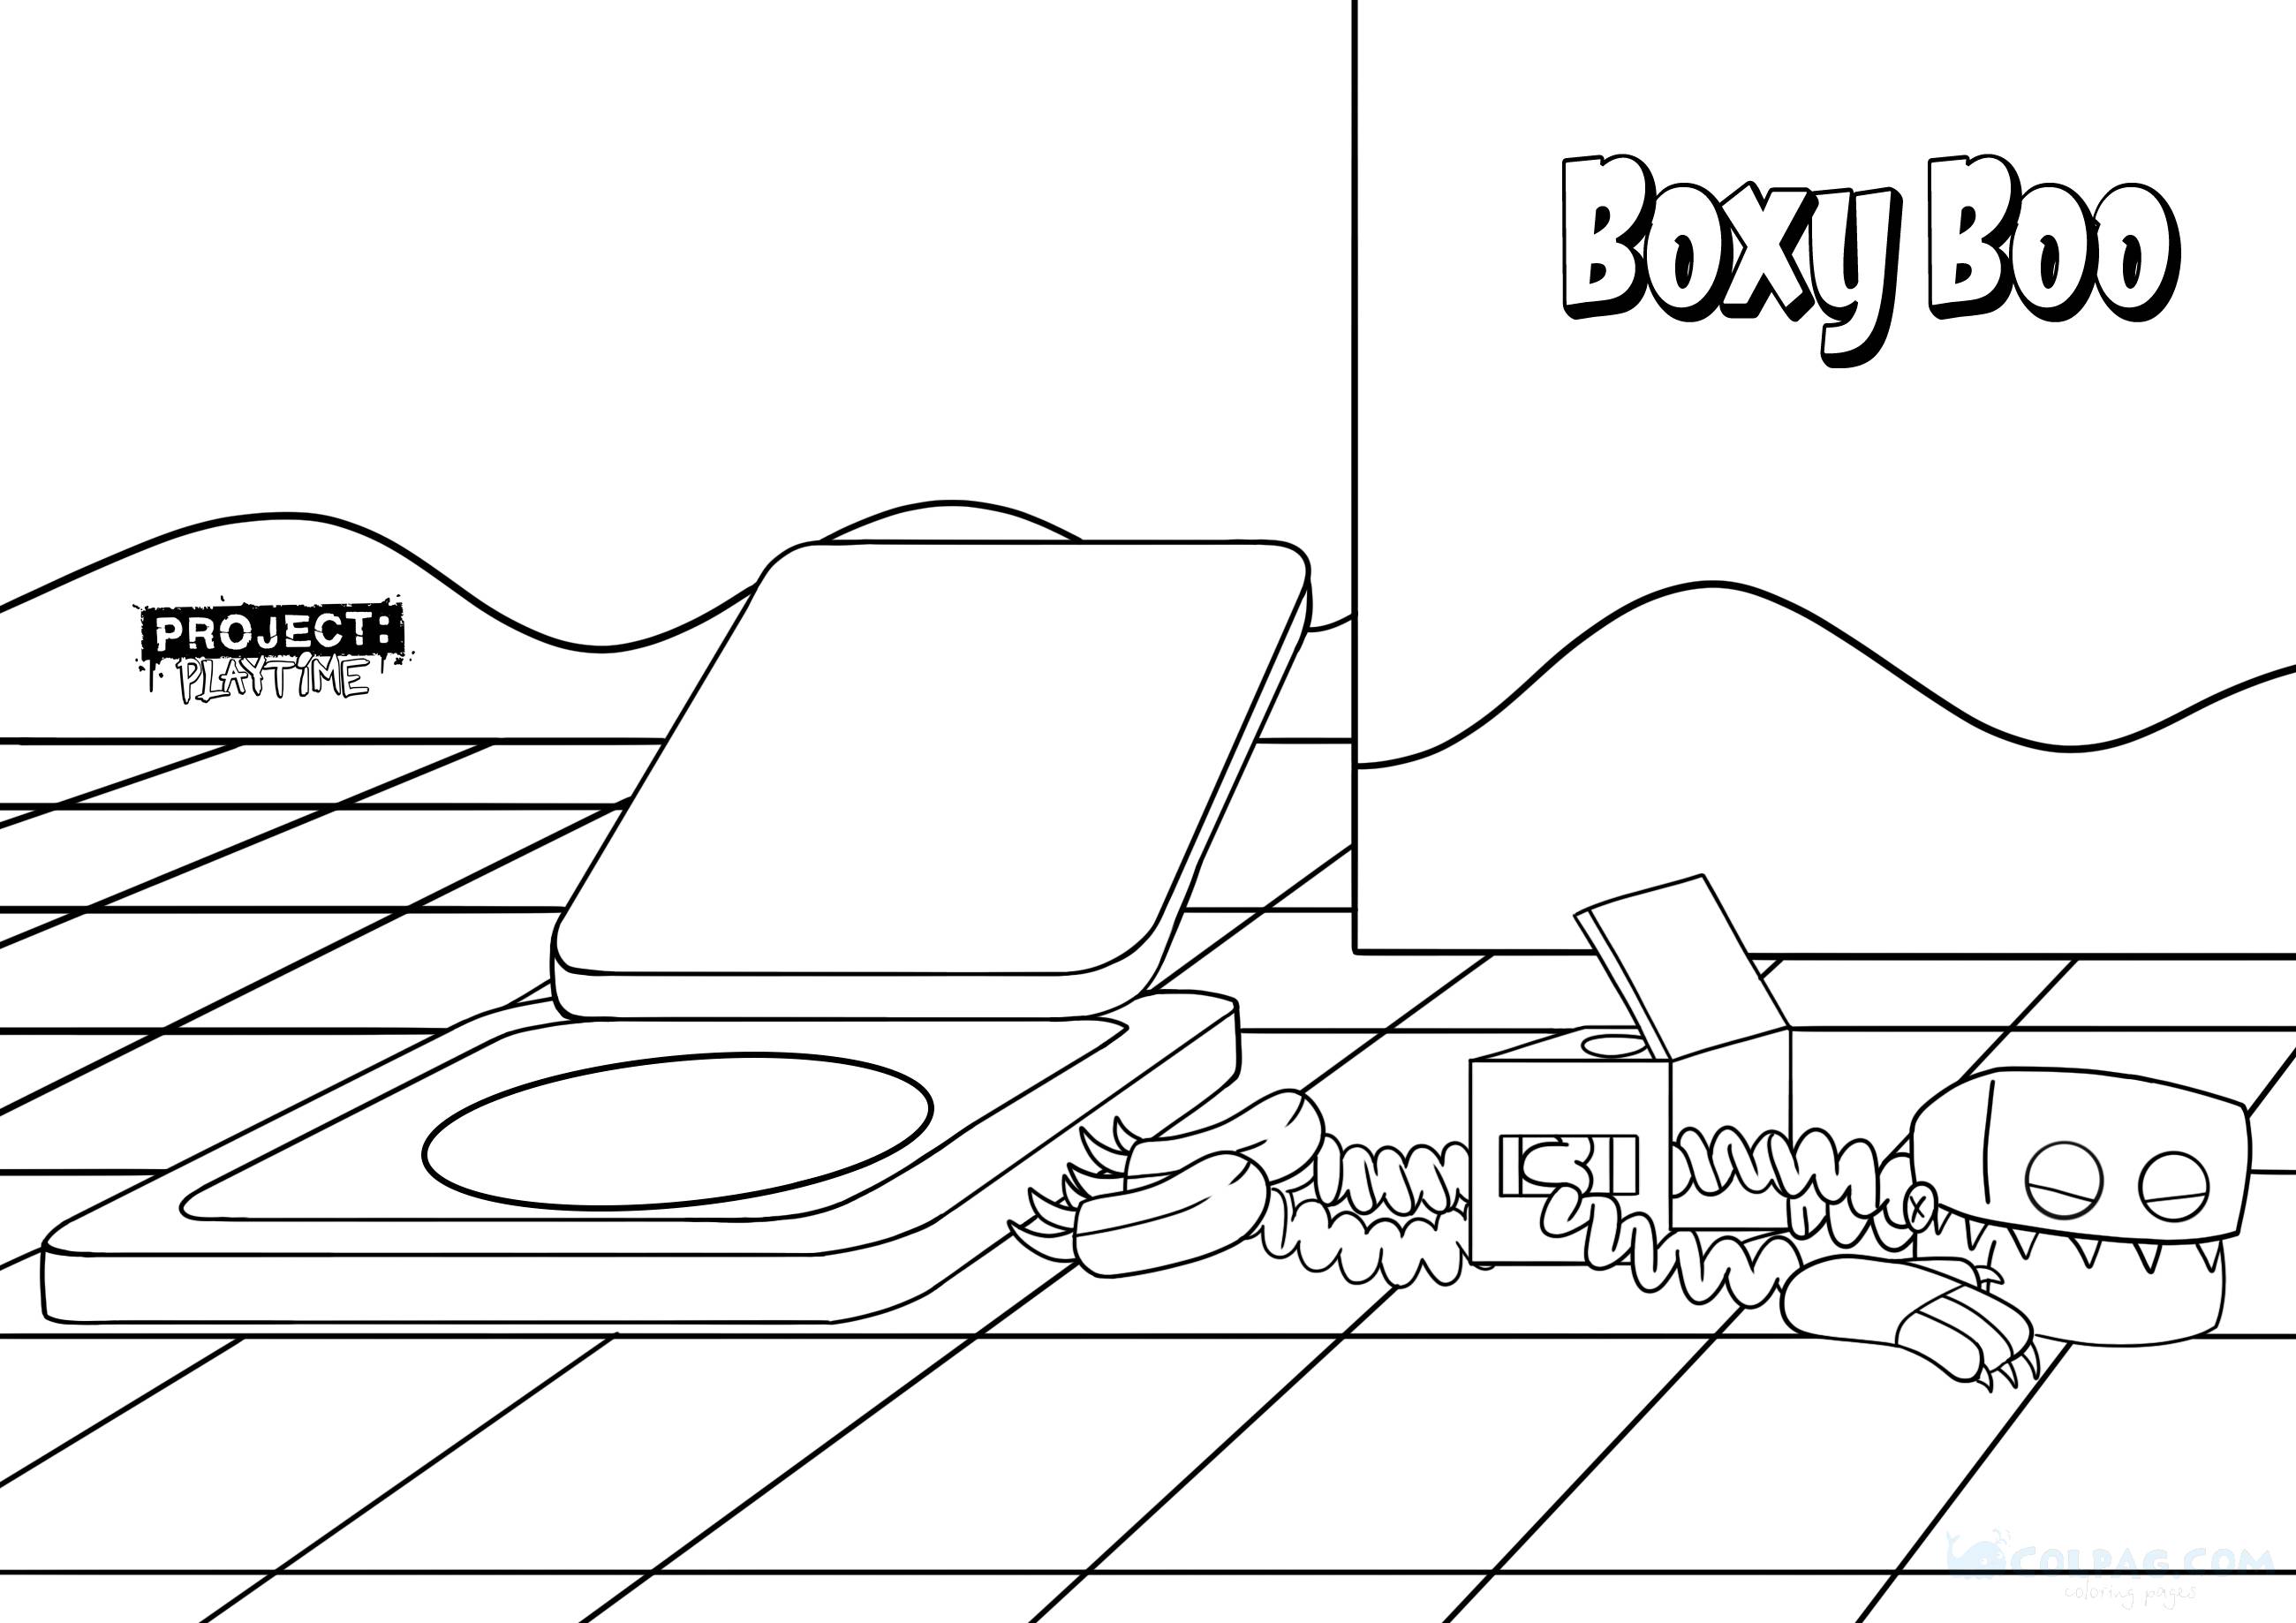 boxy-boo-project-playtime-coloring-page-colpag-com-9